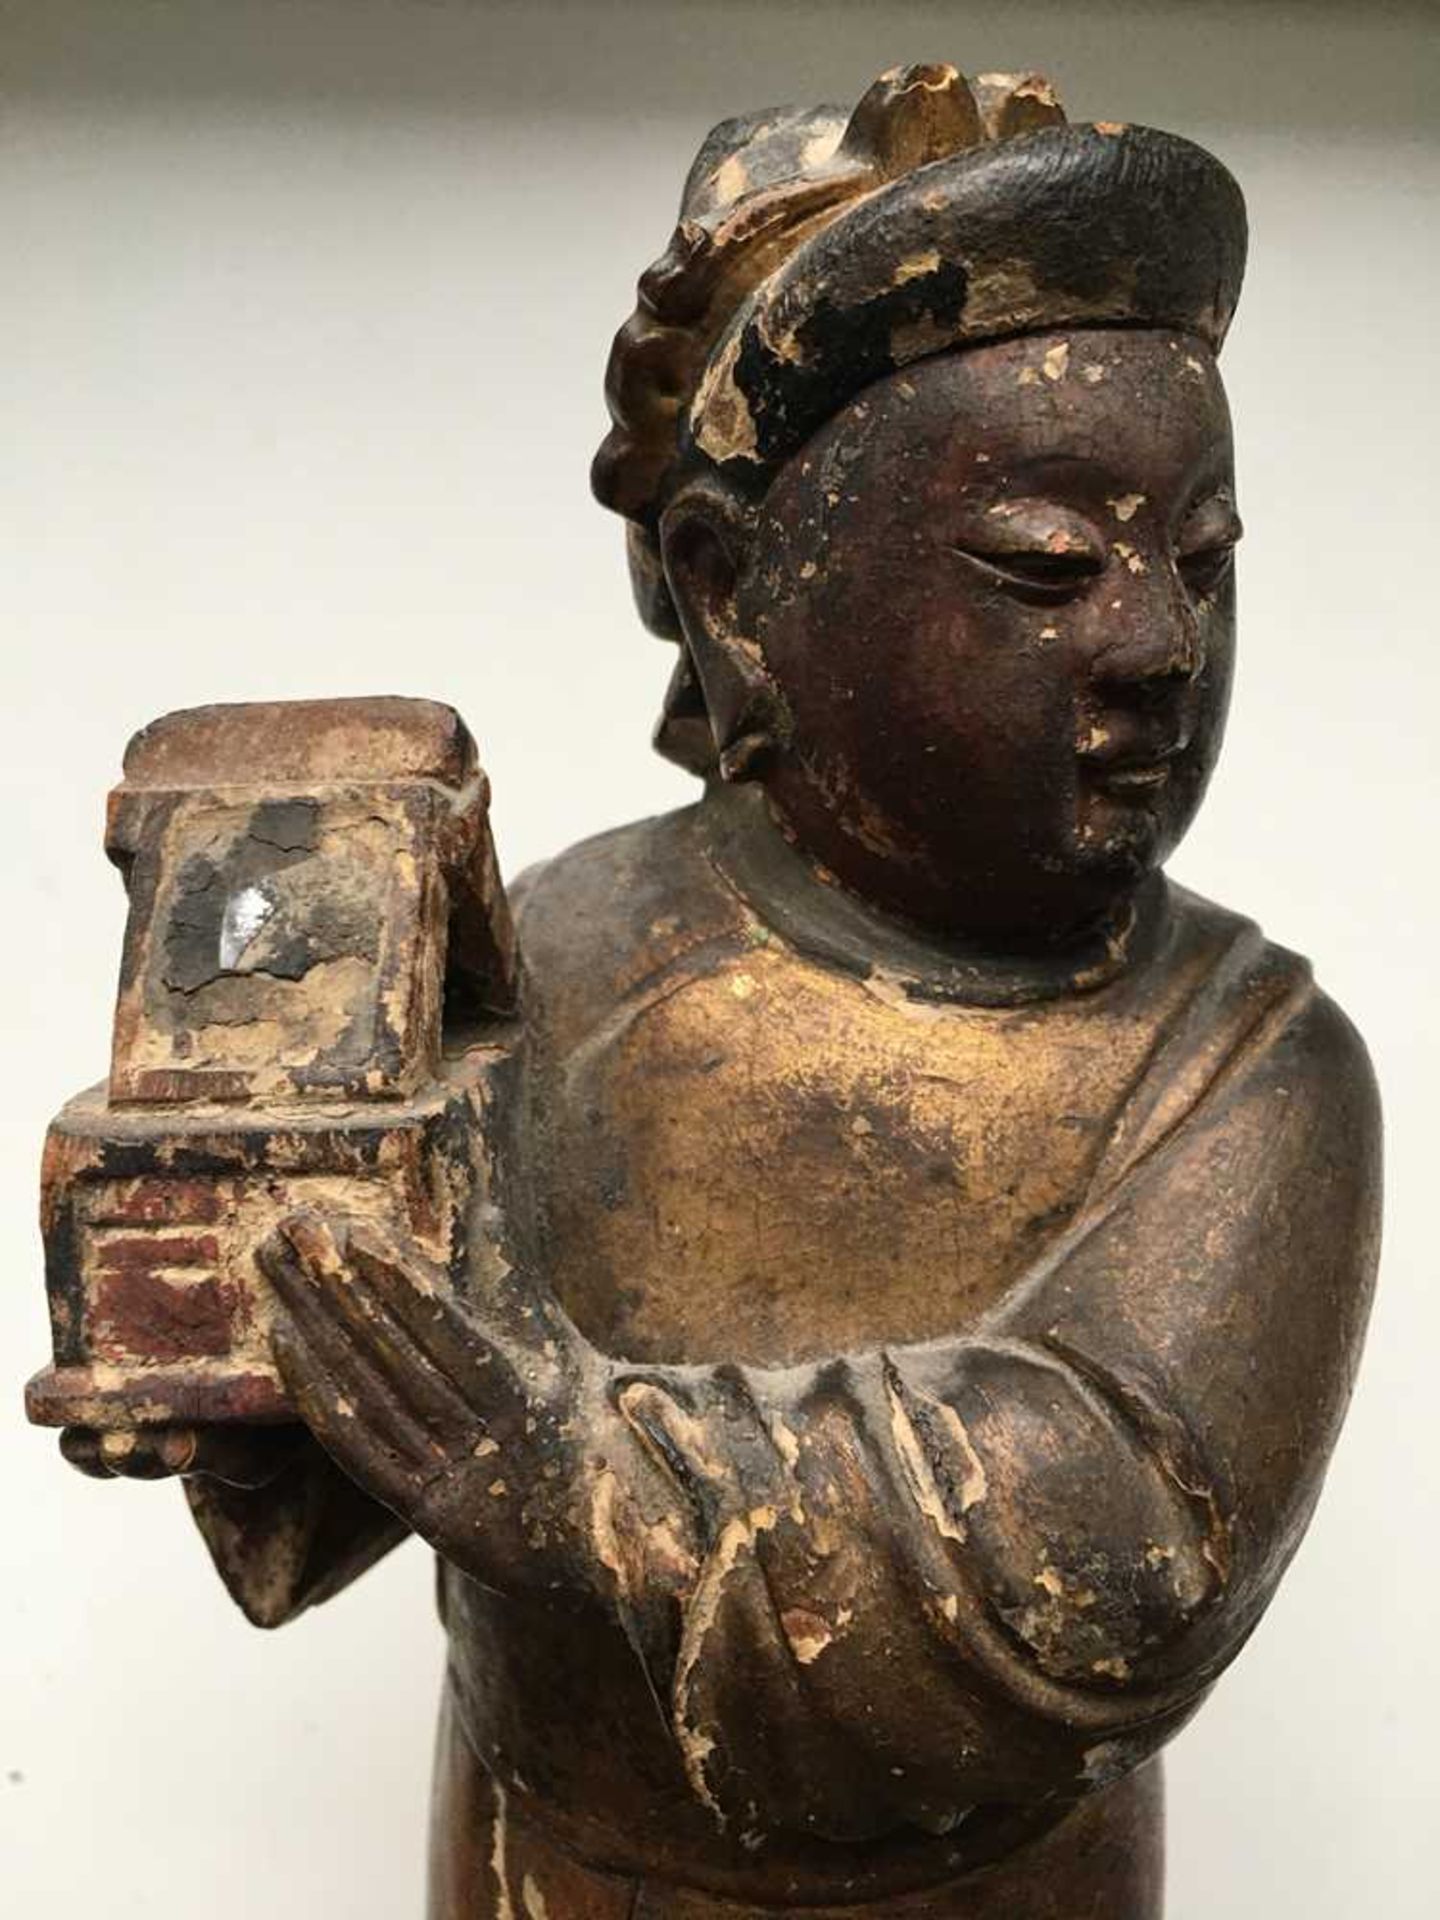 GILT-LACQUERED WOODEN FIGURE OF A DAOIST IMMORTAL QING DYNASTY, 18TH-19TH CENTURY - Image 11 of 20